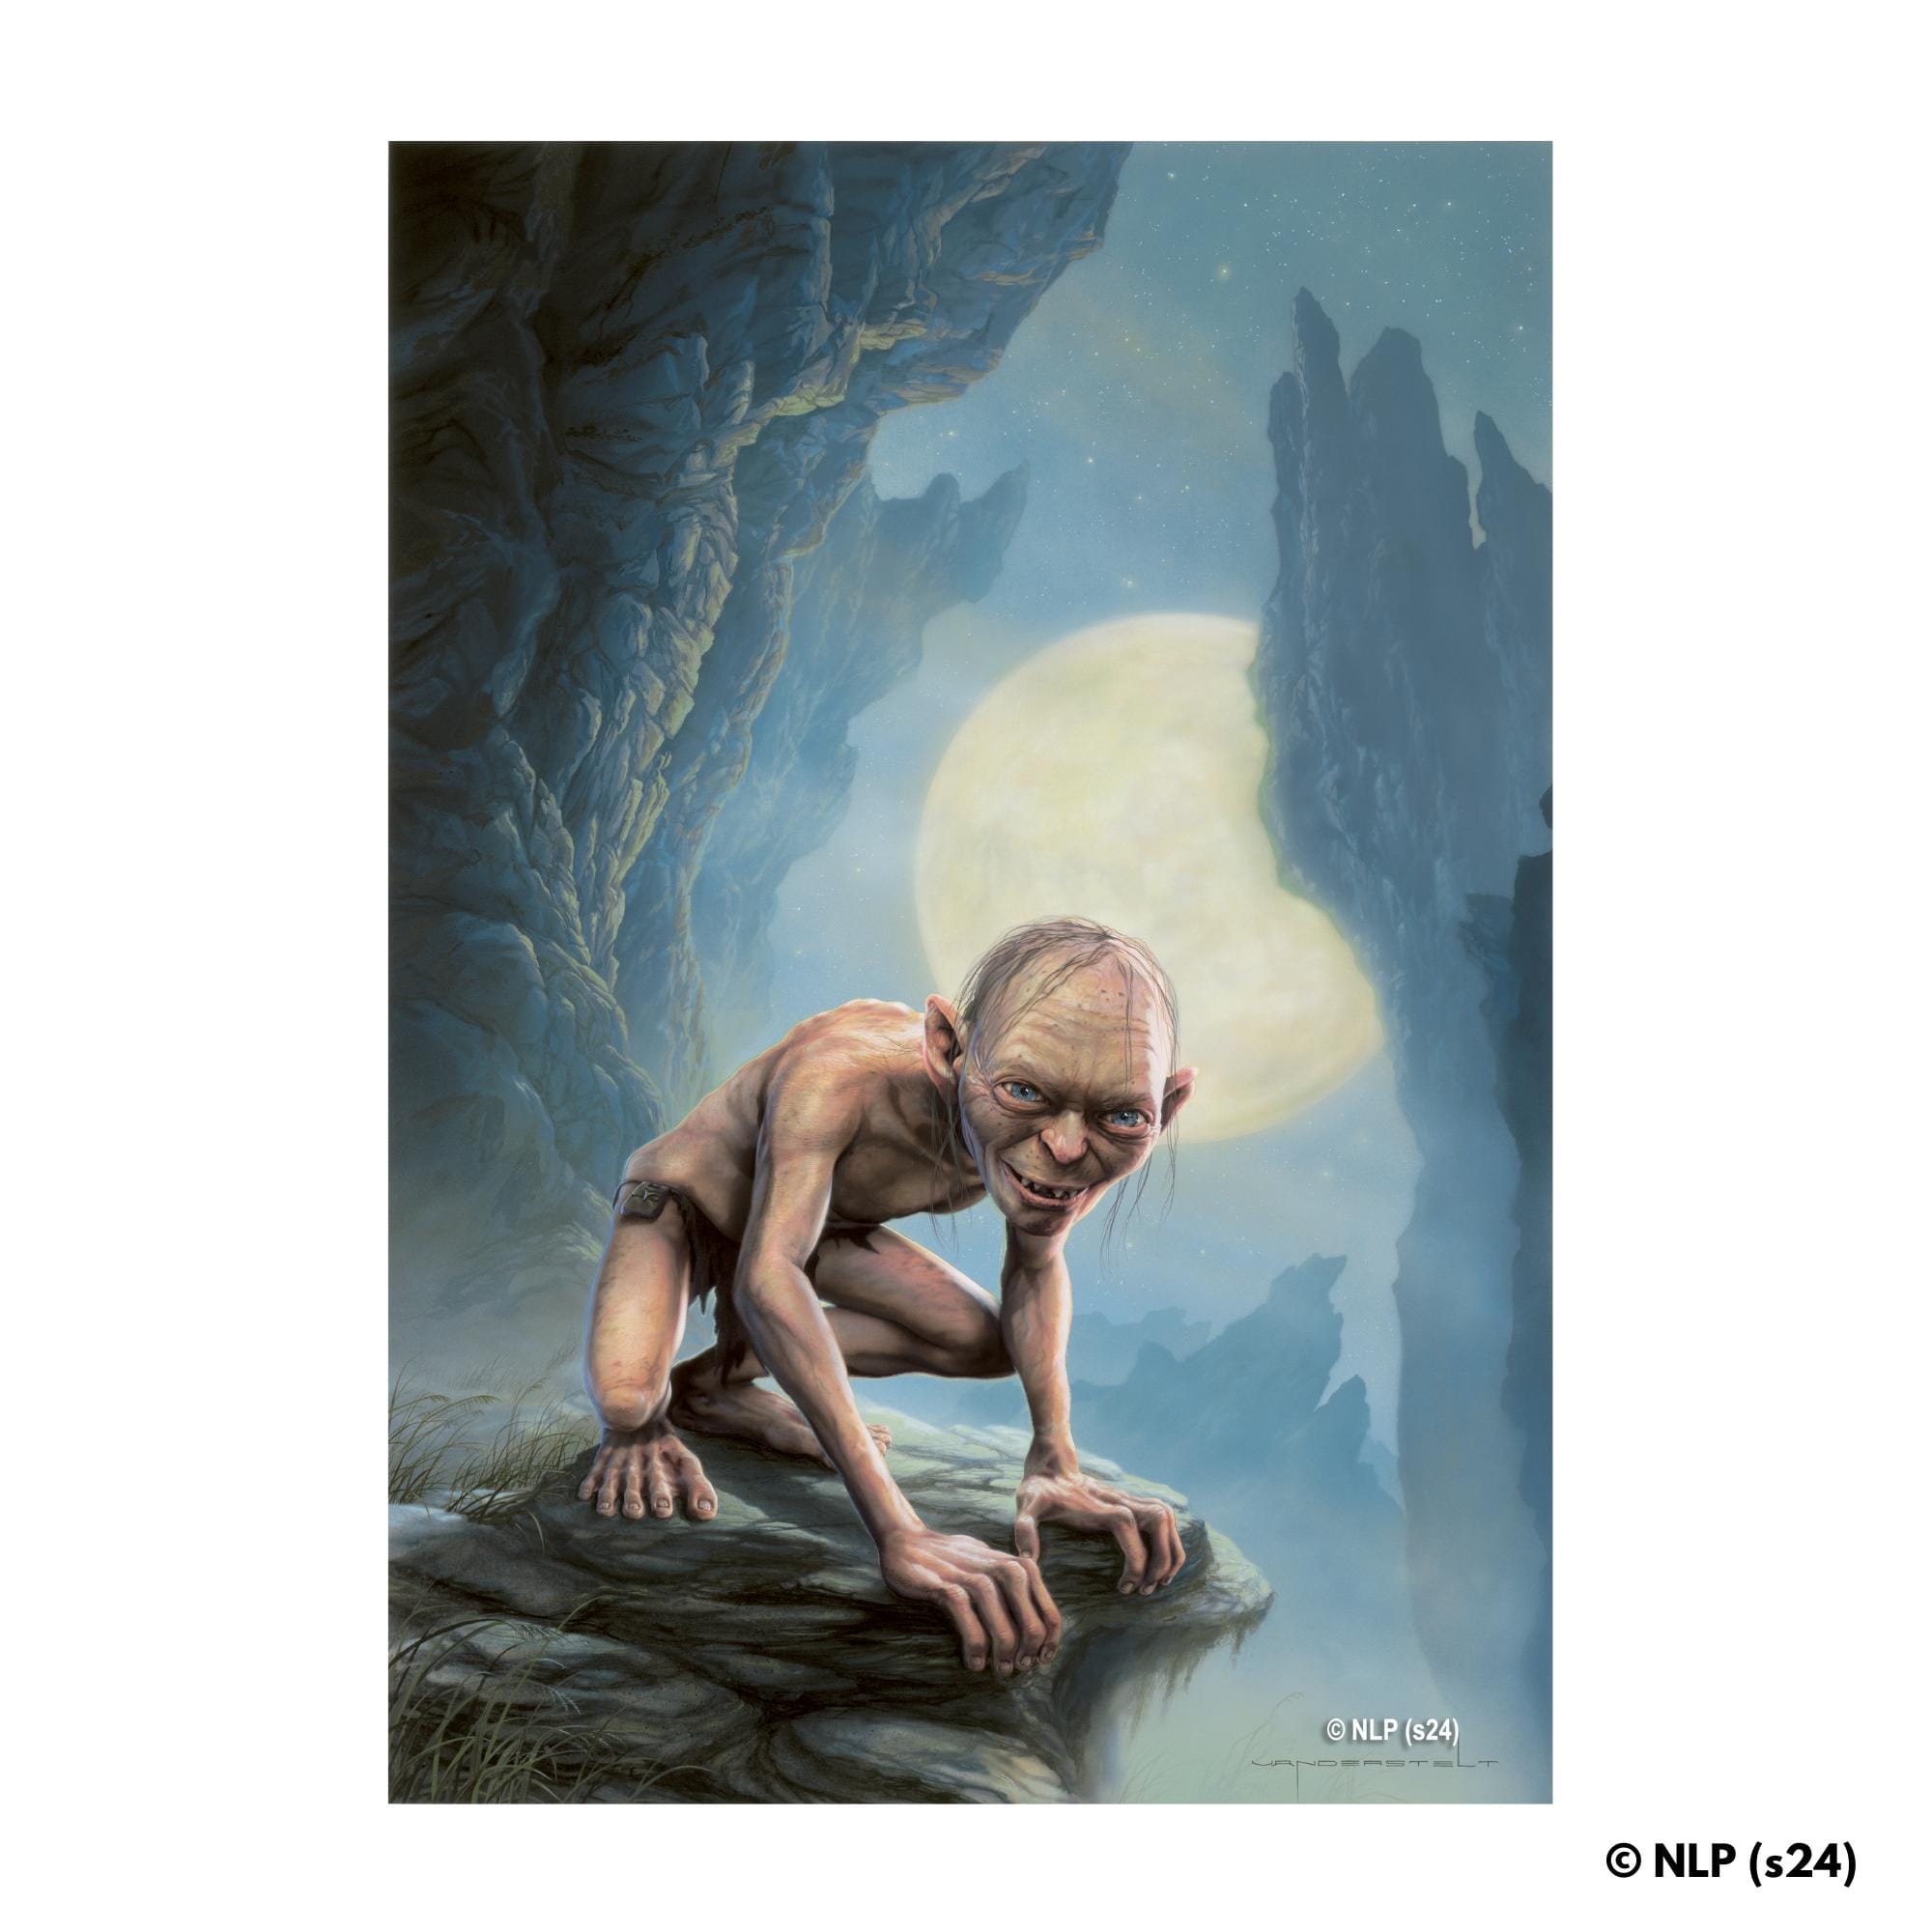 Animal Jigsaw Puzzle > Wooden Jigsaw Puzzle > Jigsaw Puzzle Gollum's Quest - Wooden Jigsaw Puzzle